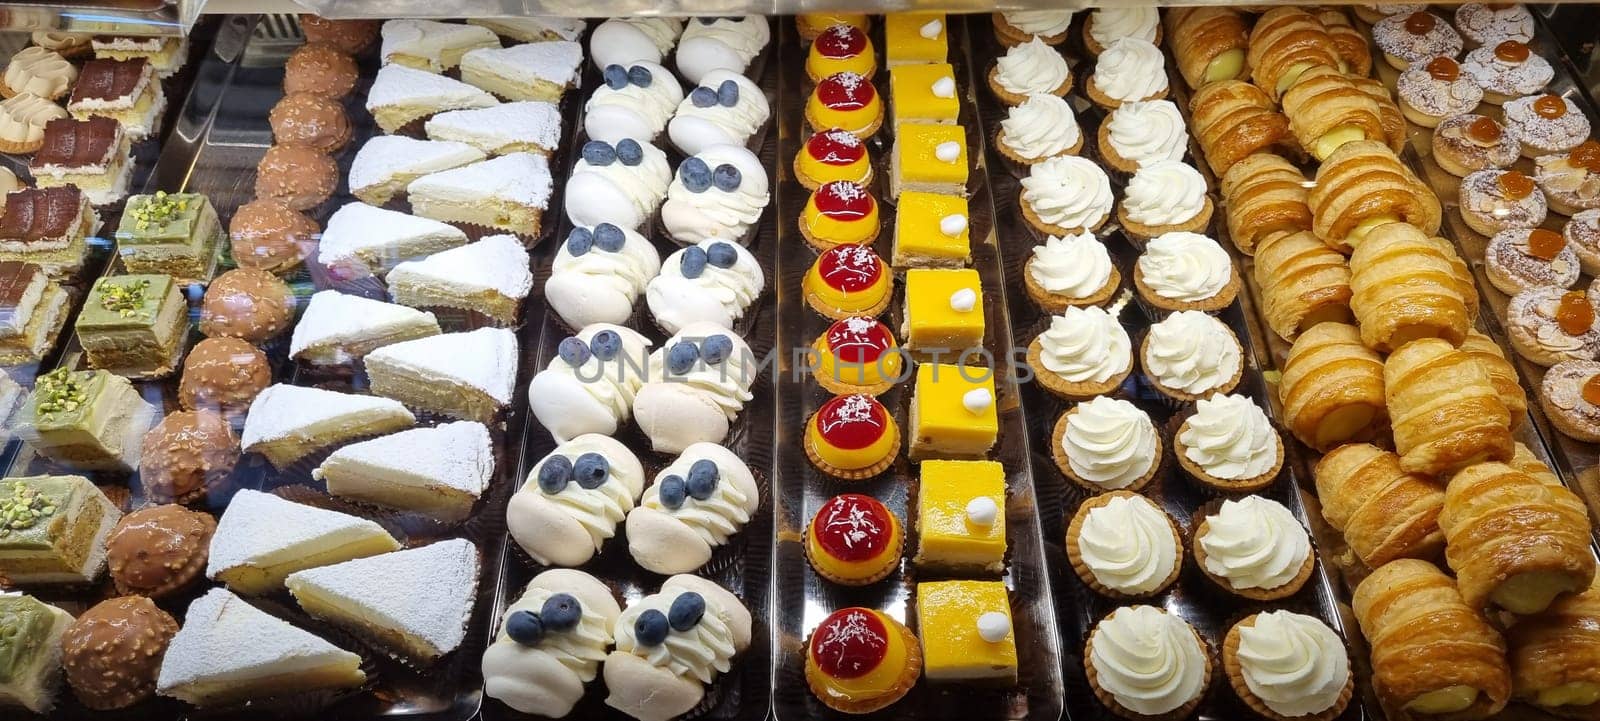 Close-up of a diverse assortment of baked goods and pastries in a commercial display by FlightVideo